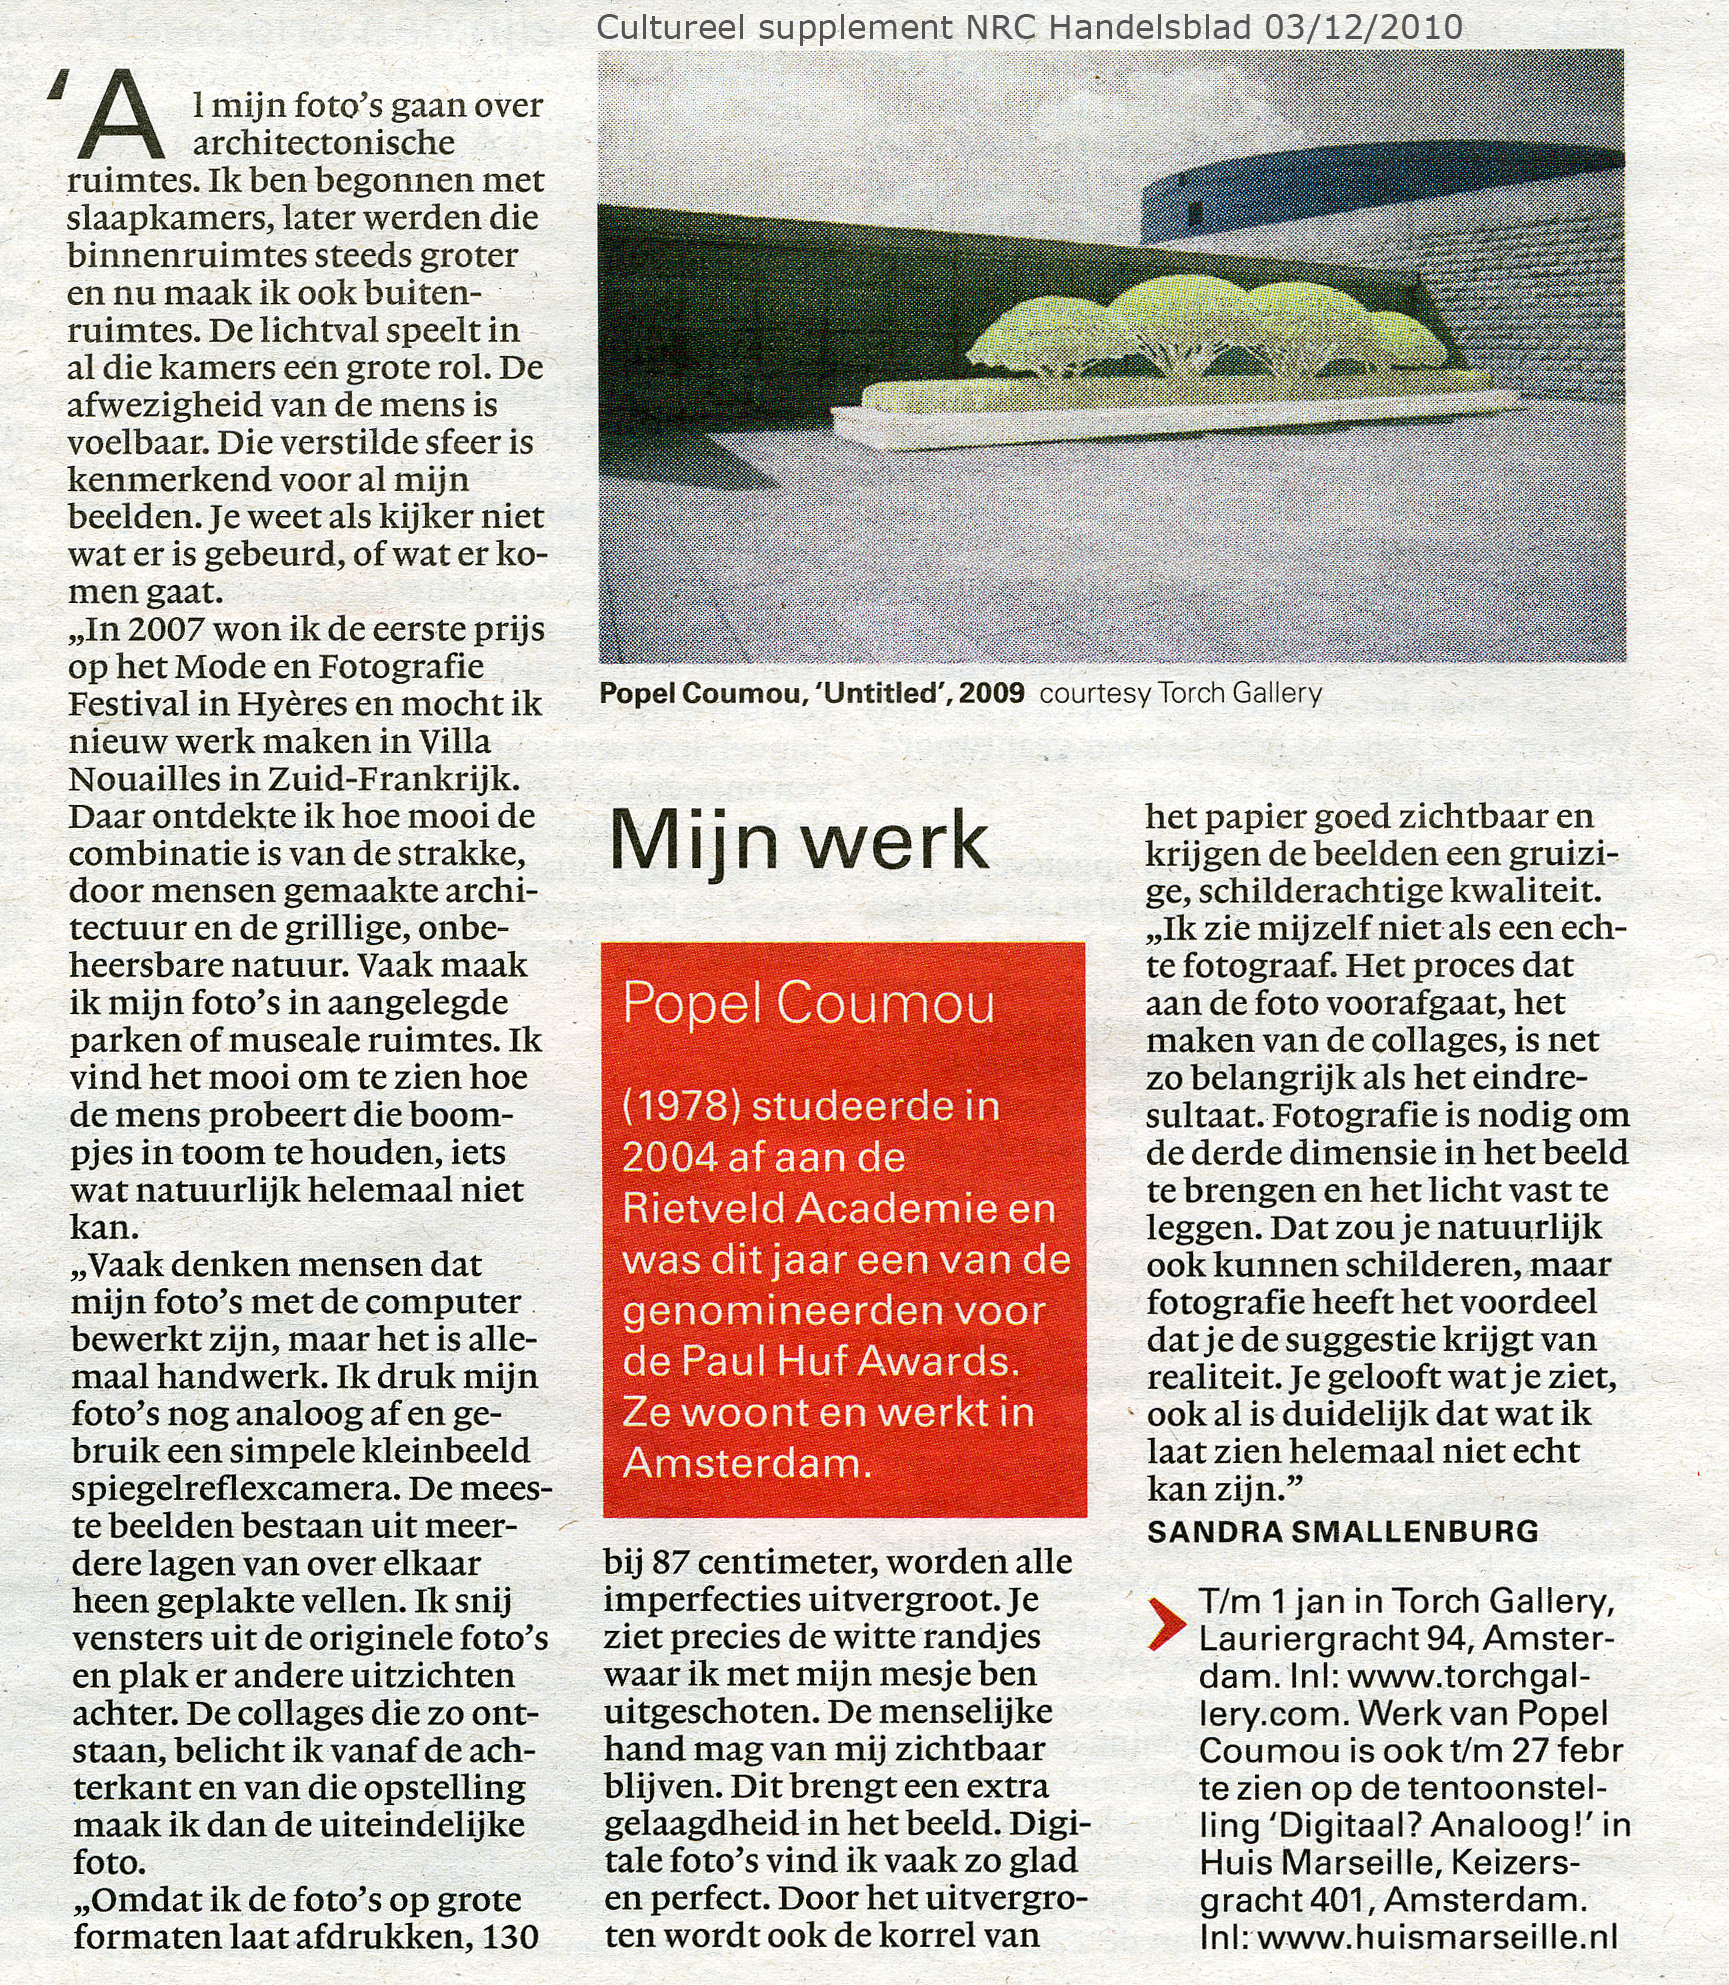 NRC Cultureel Supplement December 3th 2010 About my solo in TORCH Gallery By Sandra Smallenburg